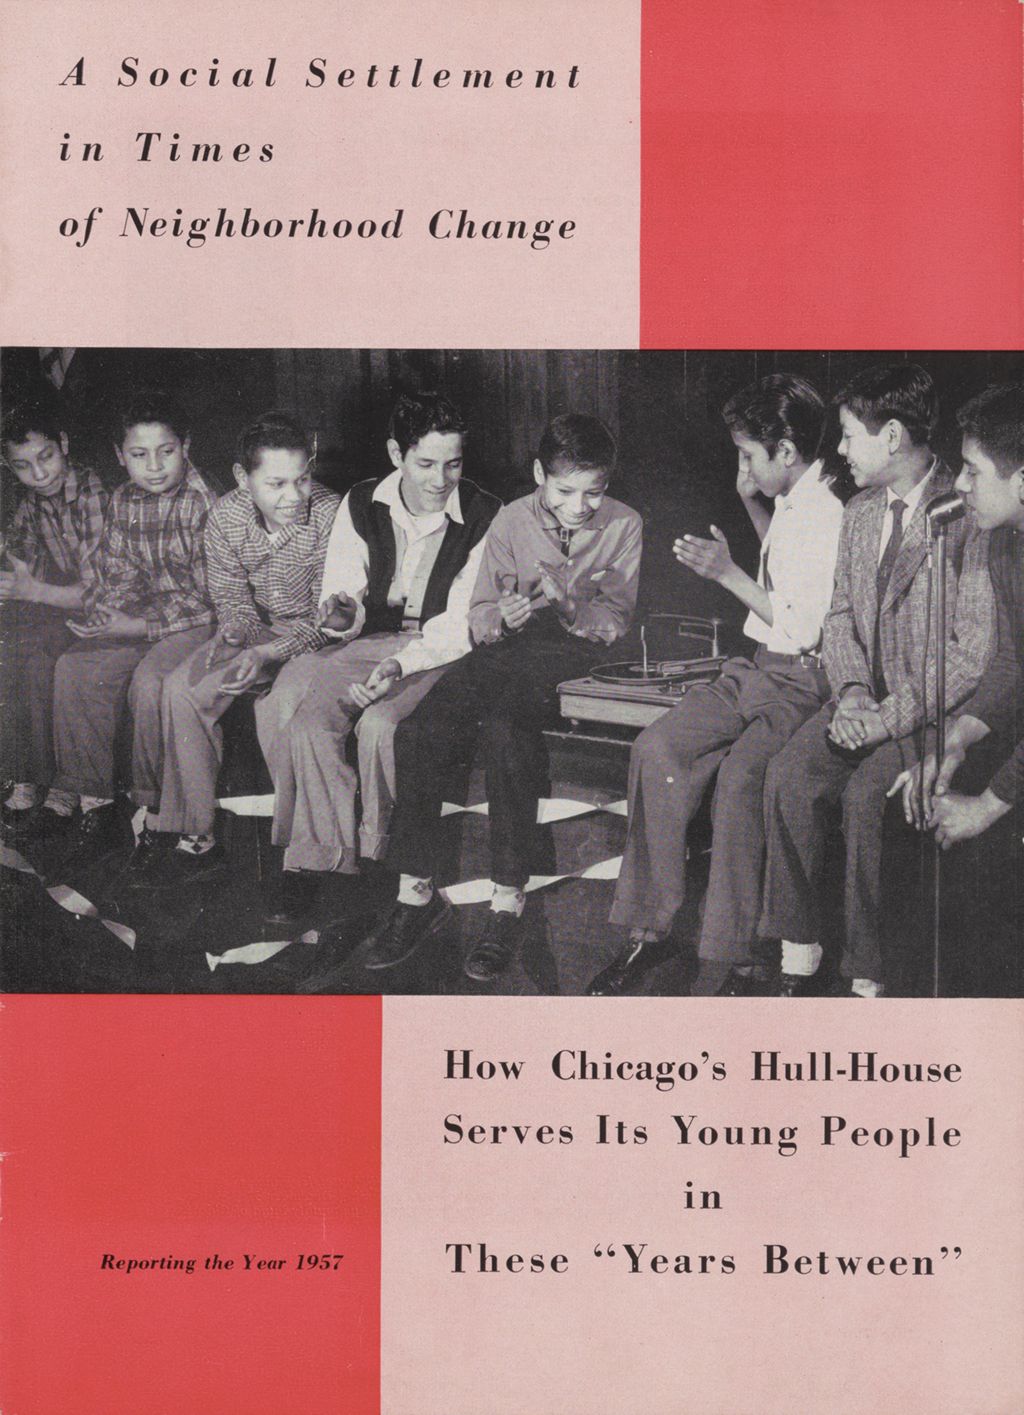 Miniature of Hull-House Year Book, 1957